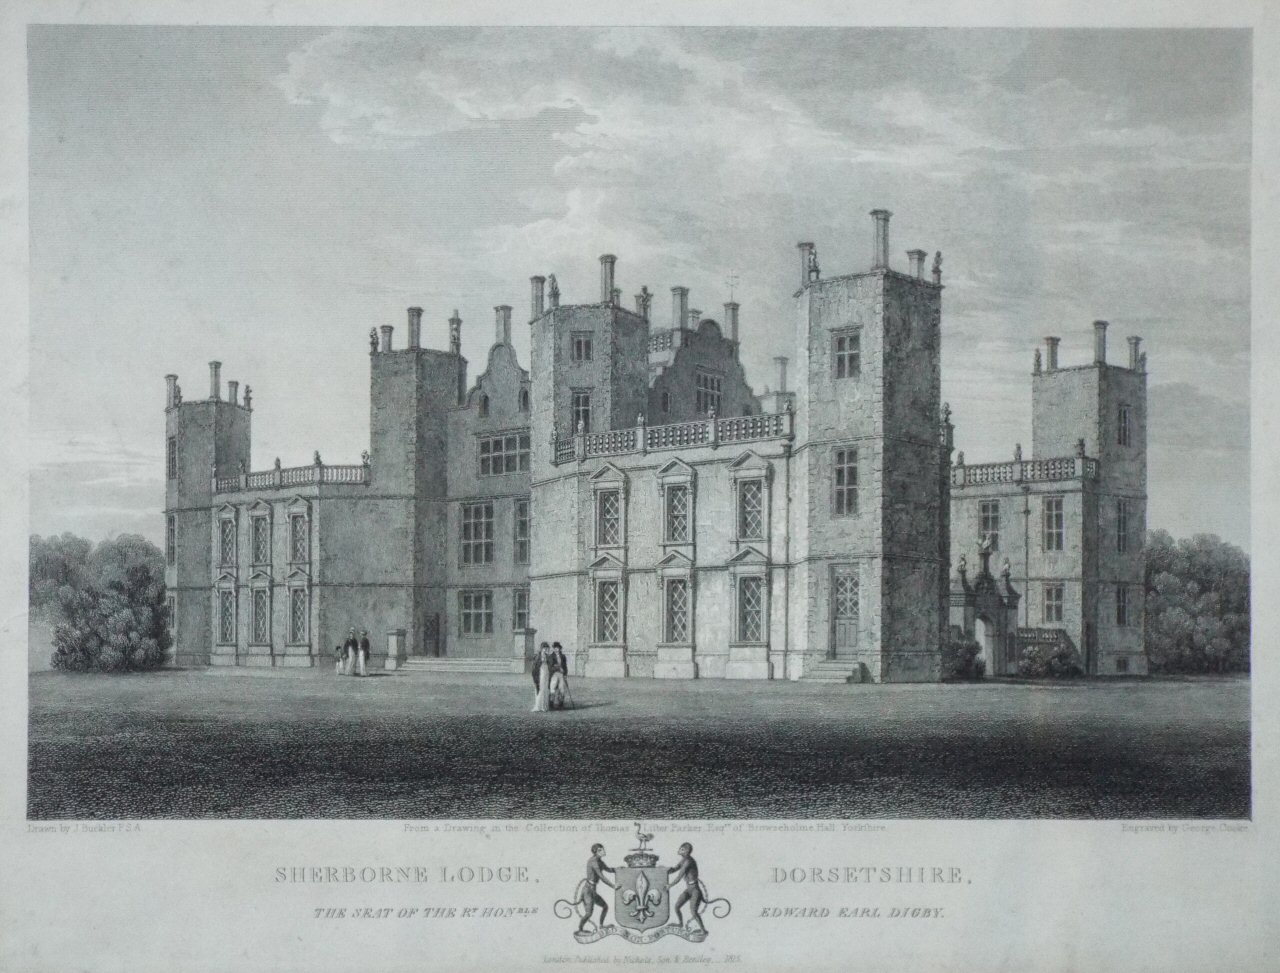 Print - Sherborne Lodge, Dorsetshire. The Seat of the Rt. Honble. Edward Early Rigby. - Cooke